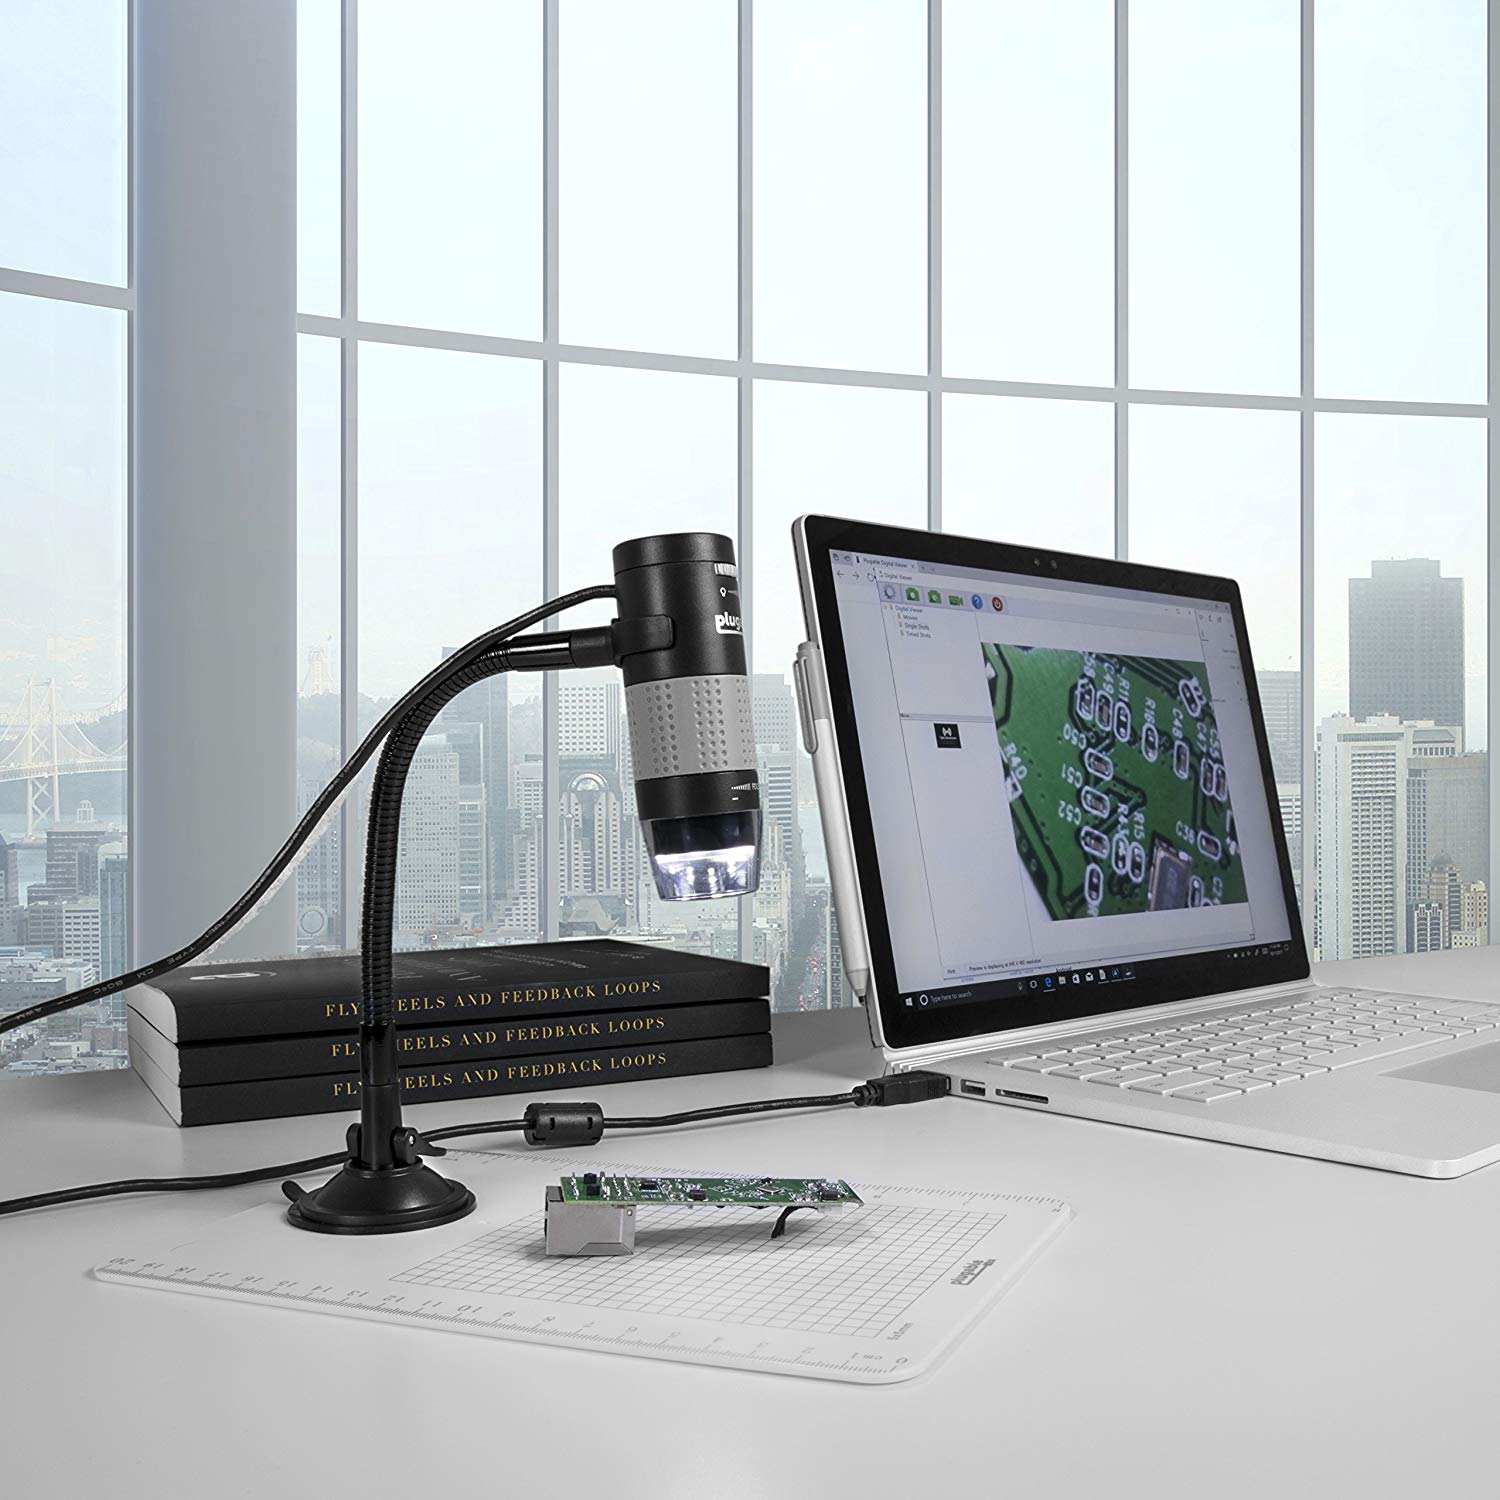 Plugable 250x Digital USB Microscope with Observation Stand